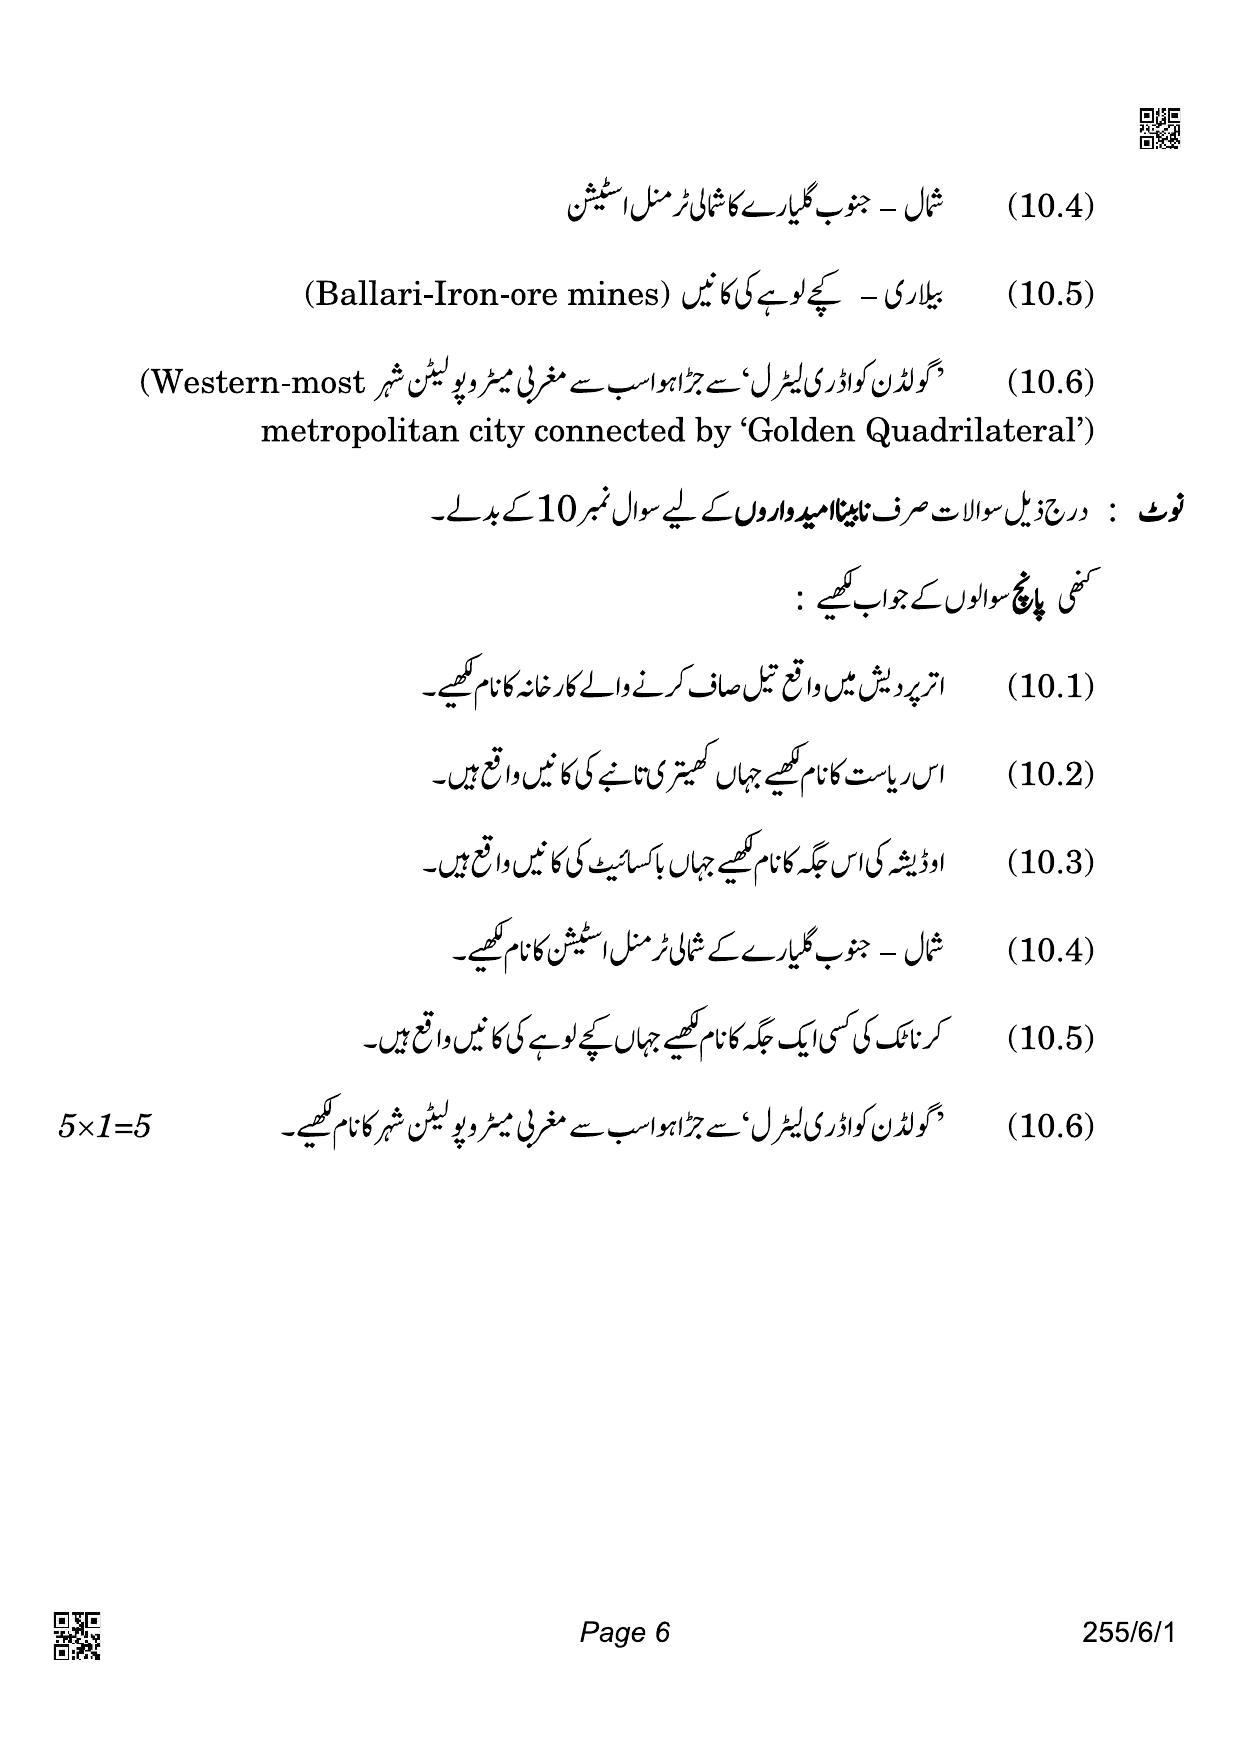 CBSE Class 12 255-6-1 Geography Urdu 2022 Compartment Question Paper - Page 6